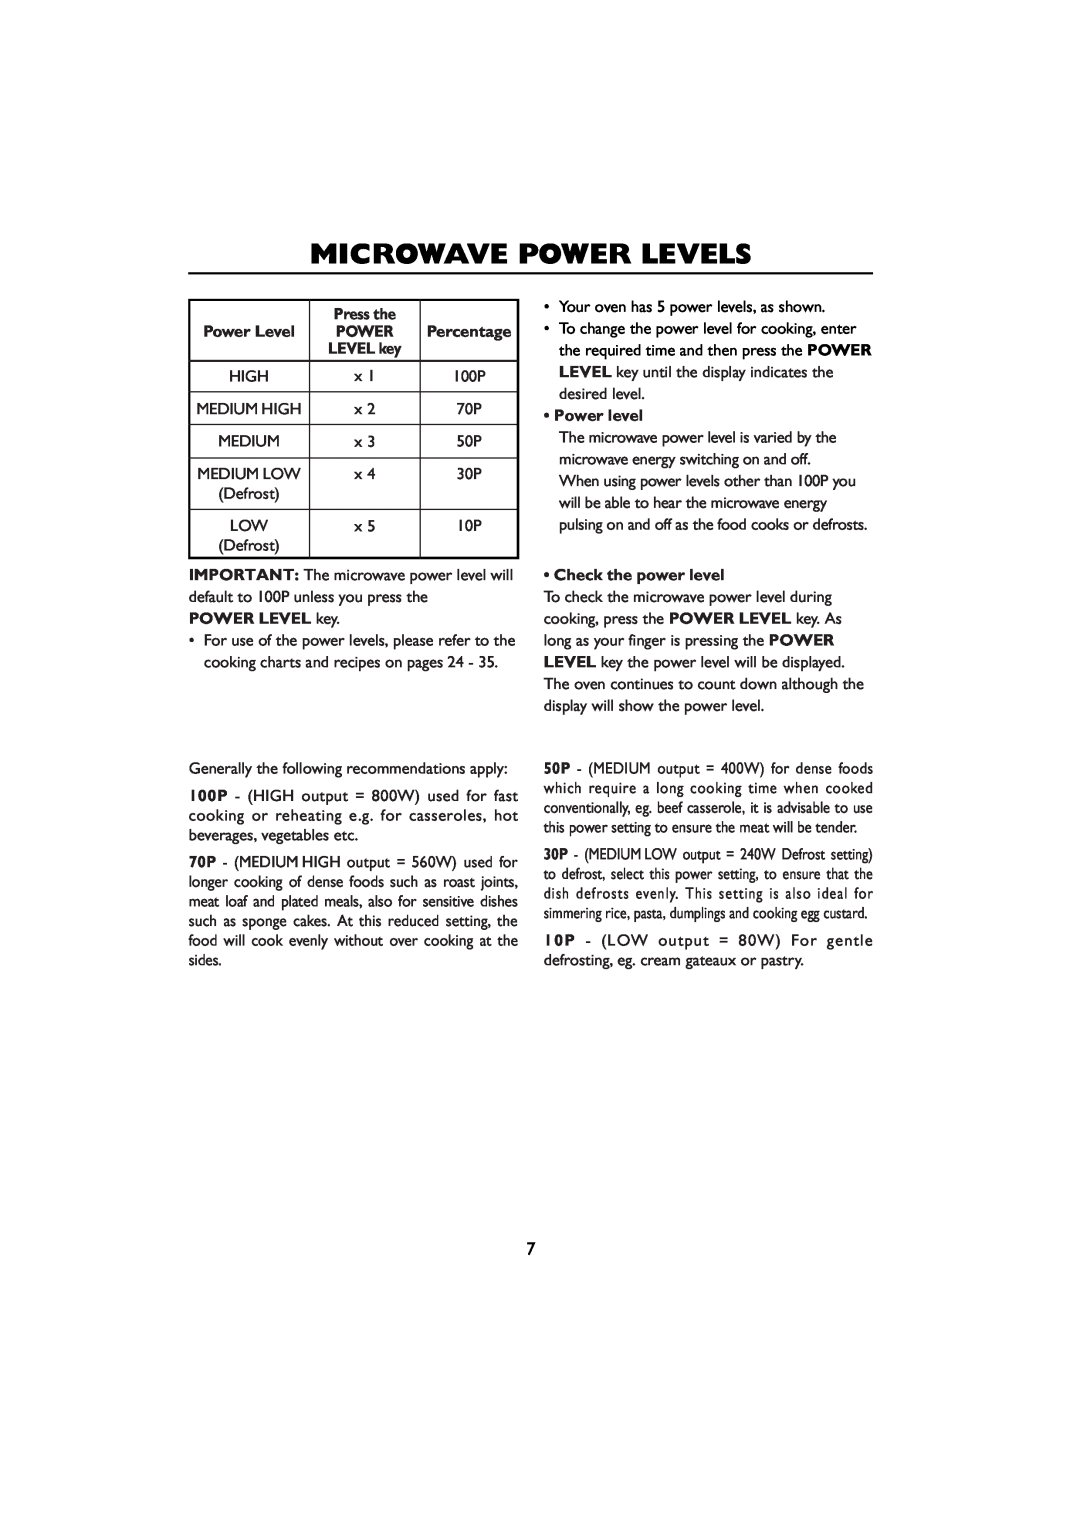 Sharp R-259 operation manual Microwave Power Levels, Press the, Percentage, Power level, Check the power level 